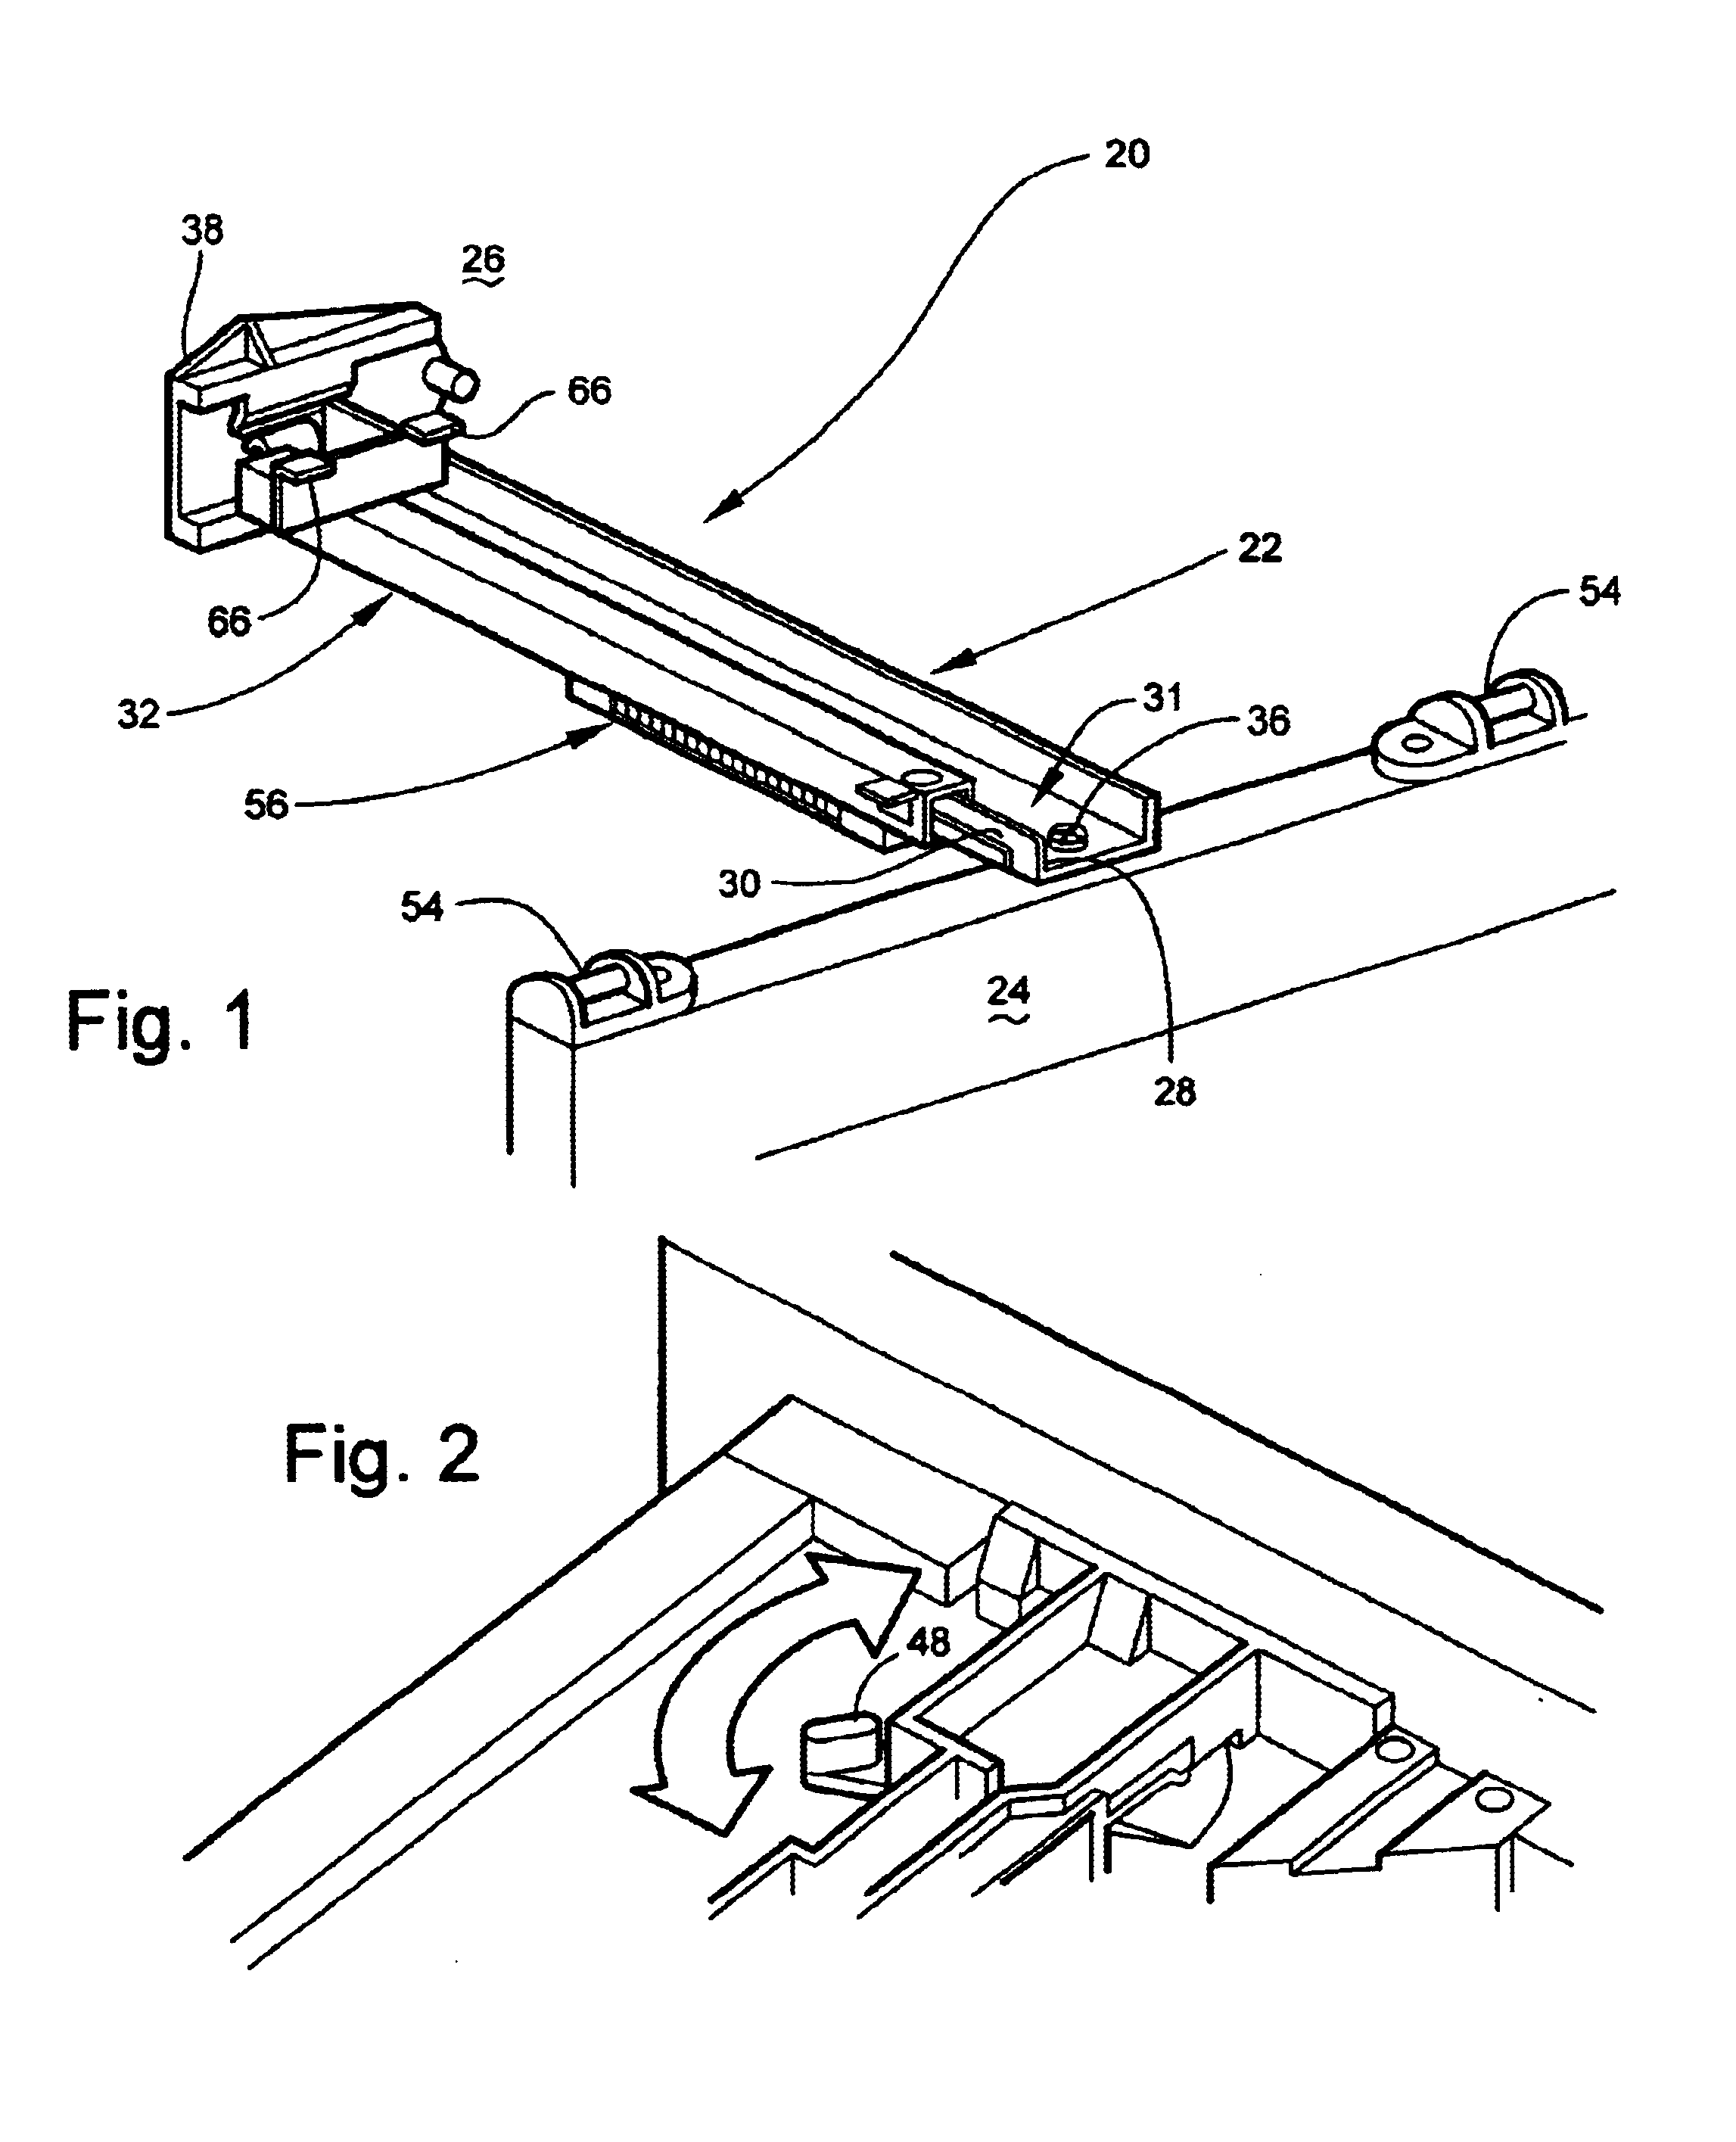 Drawer support and closure apparatus